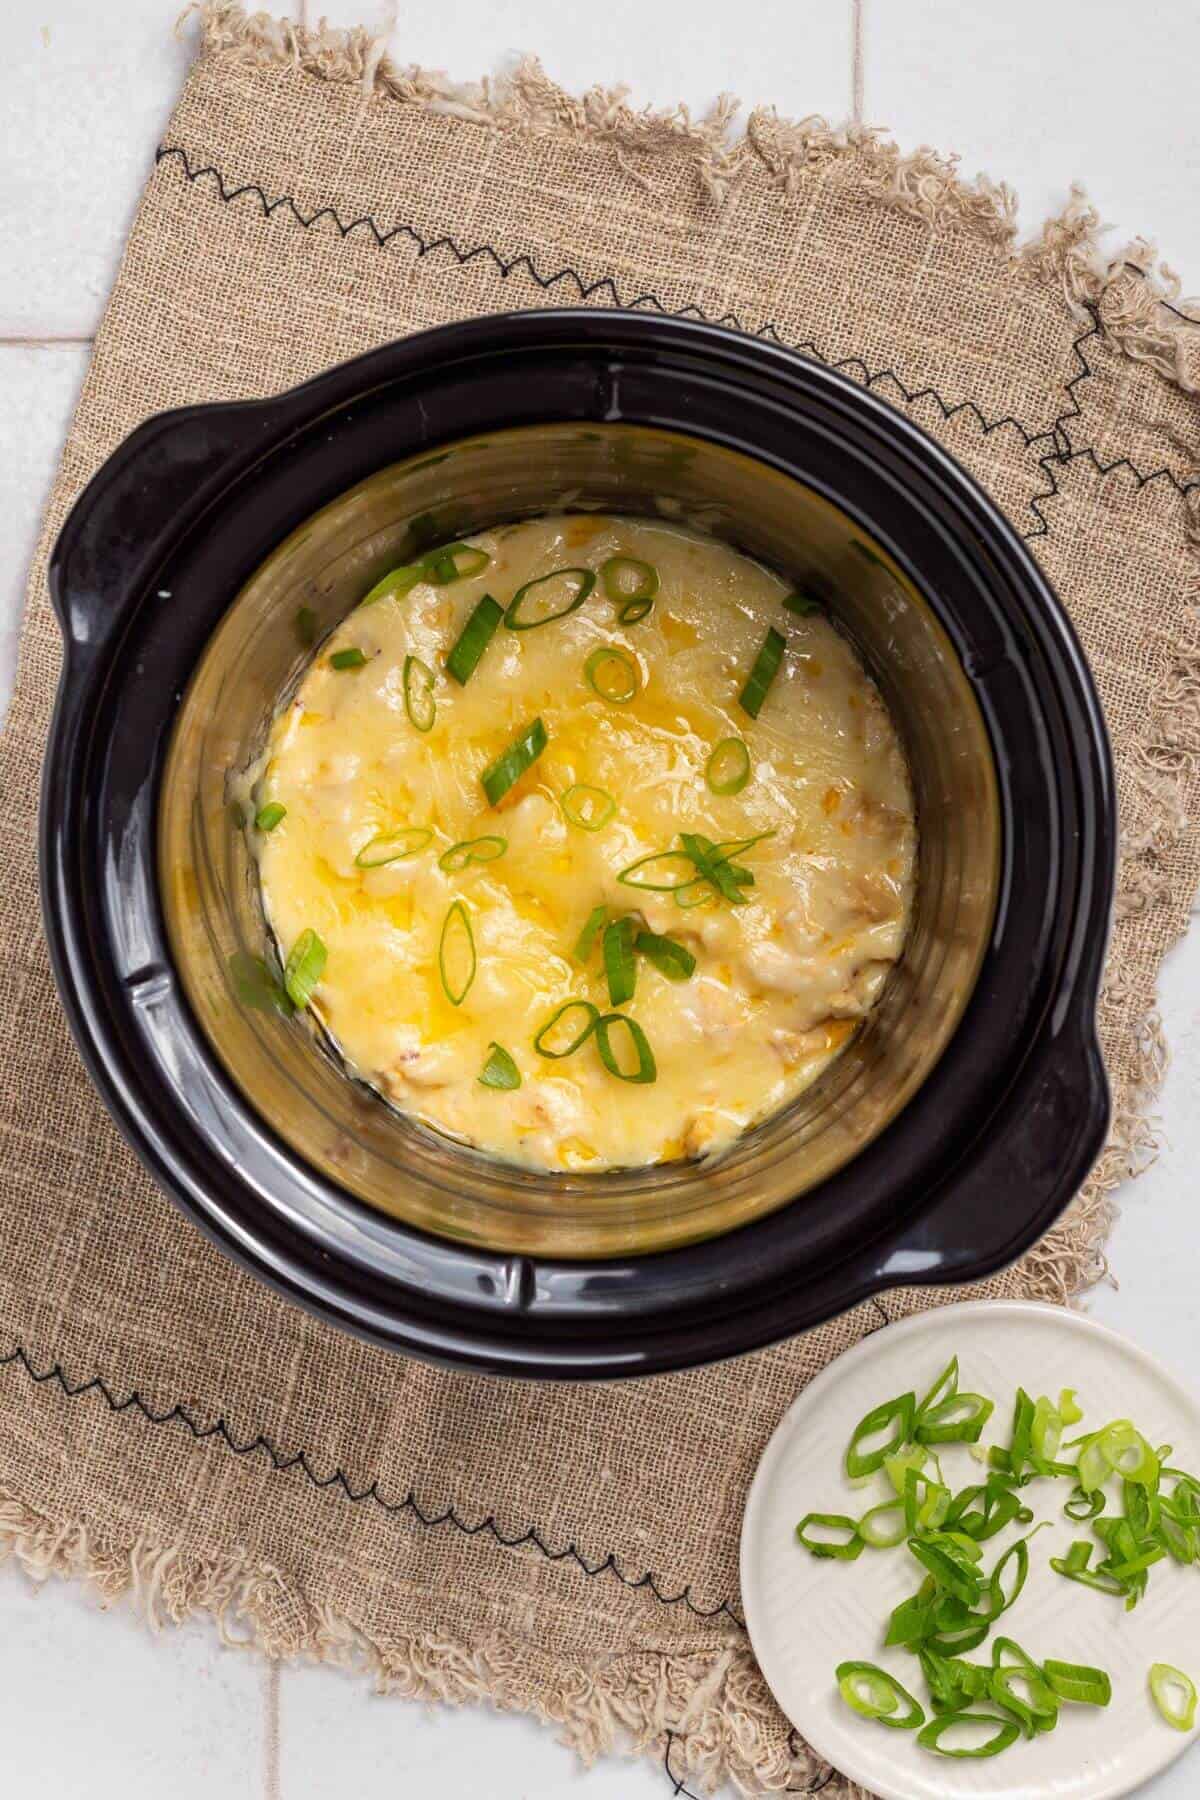 Melted shredded cheese and sliced green onions over dip in crock pot.